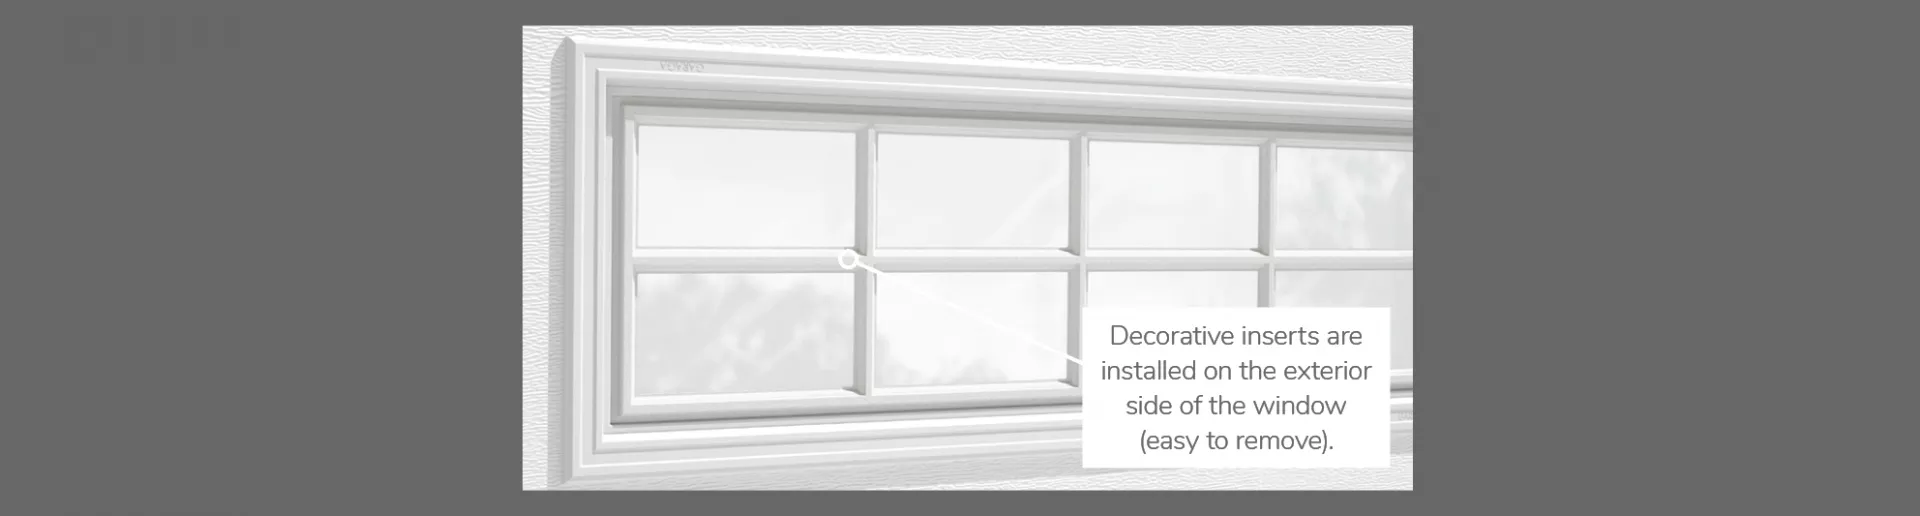 Stockton Decorative Insert, 40" x 13", available for door R-16 and R-12